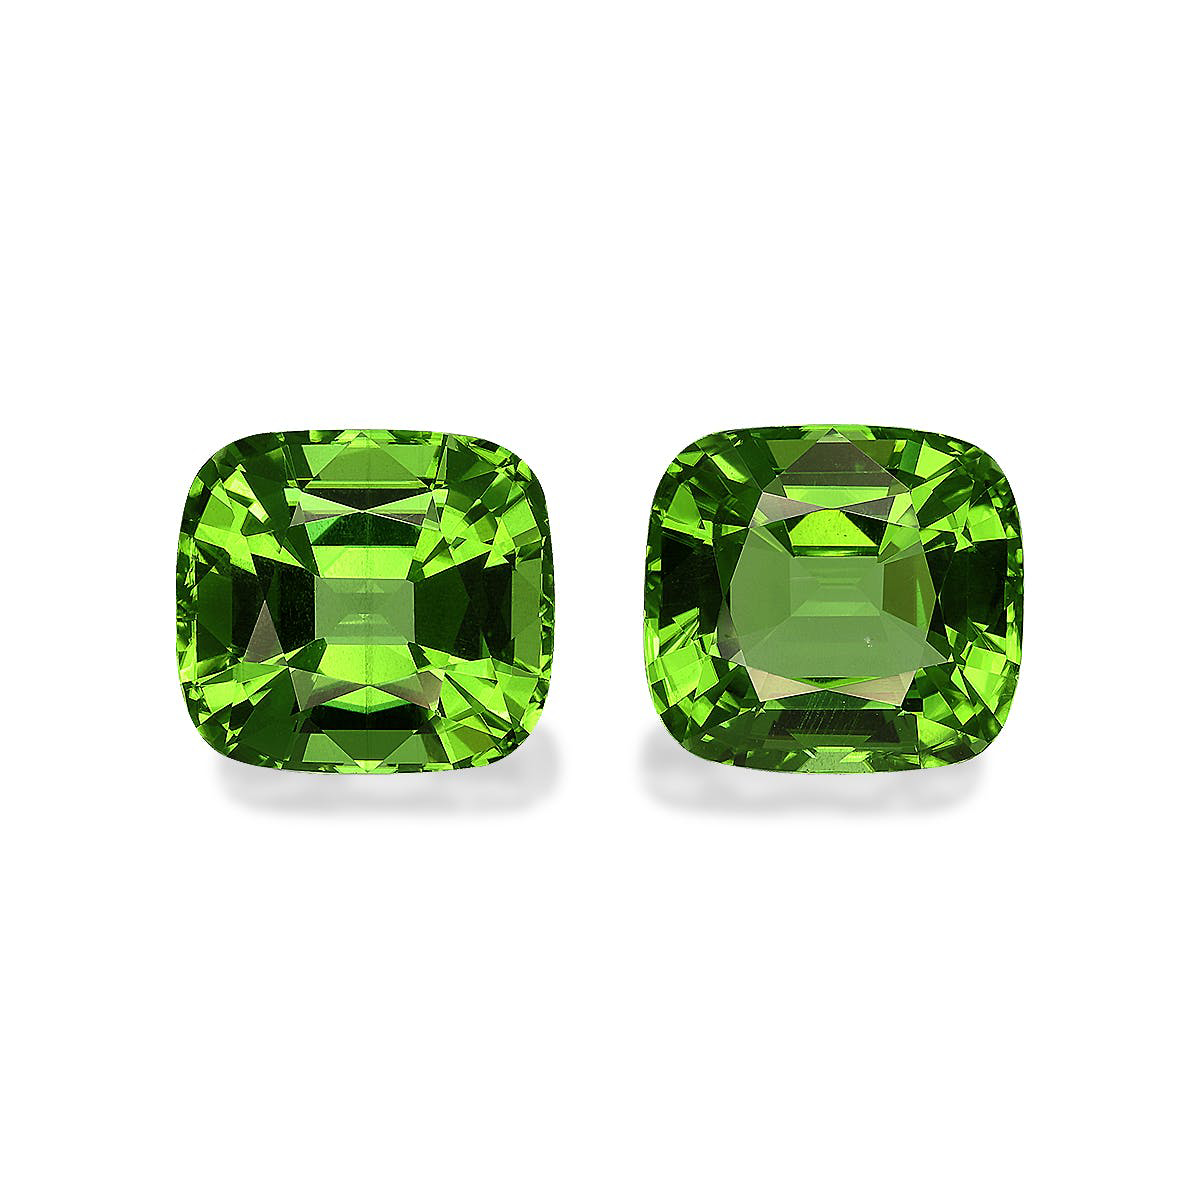 Picture of Vivid Green Peridot 17.19ct - Pair (PD0349)